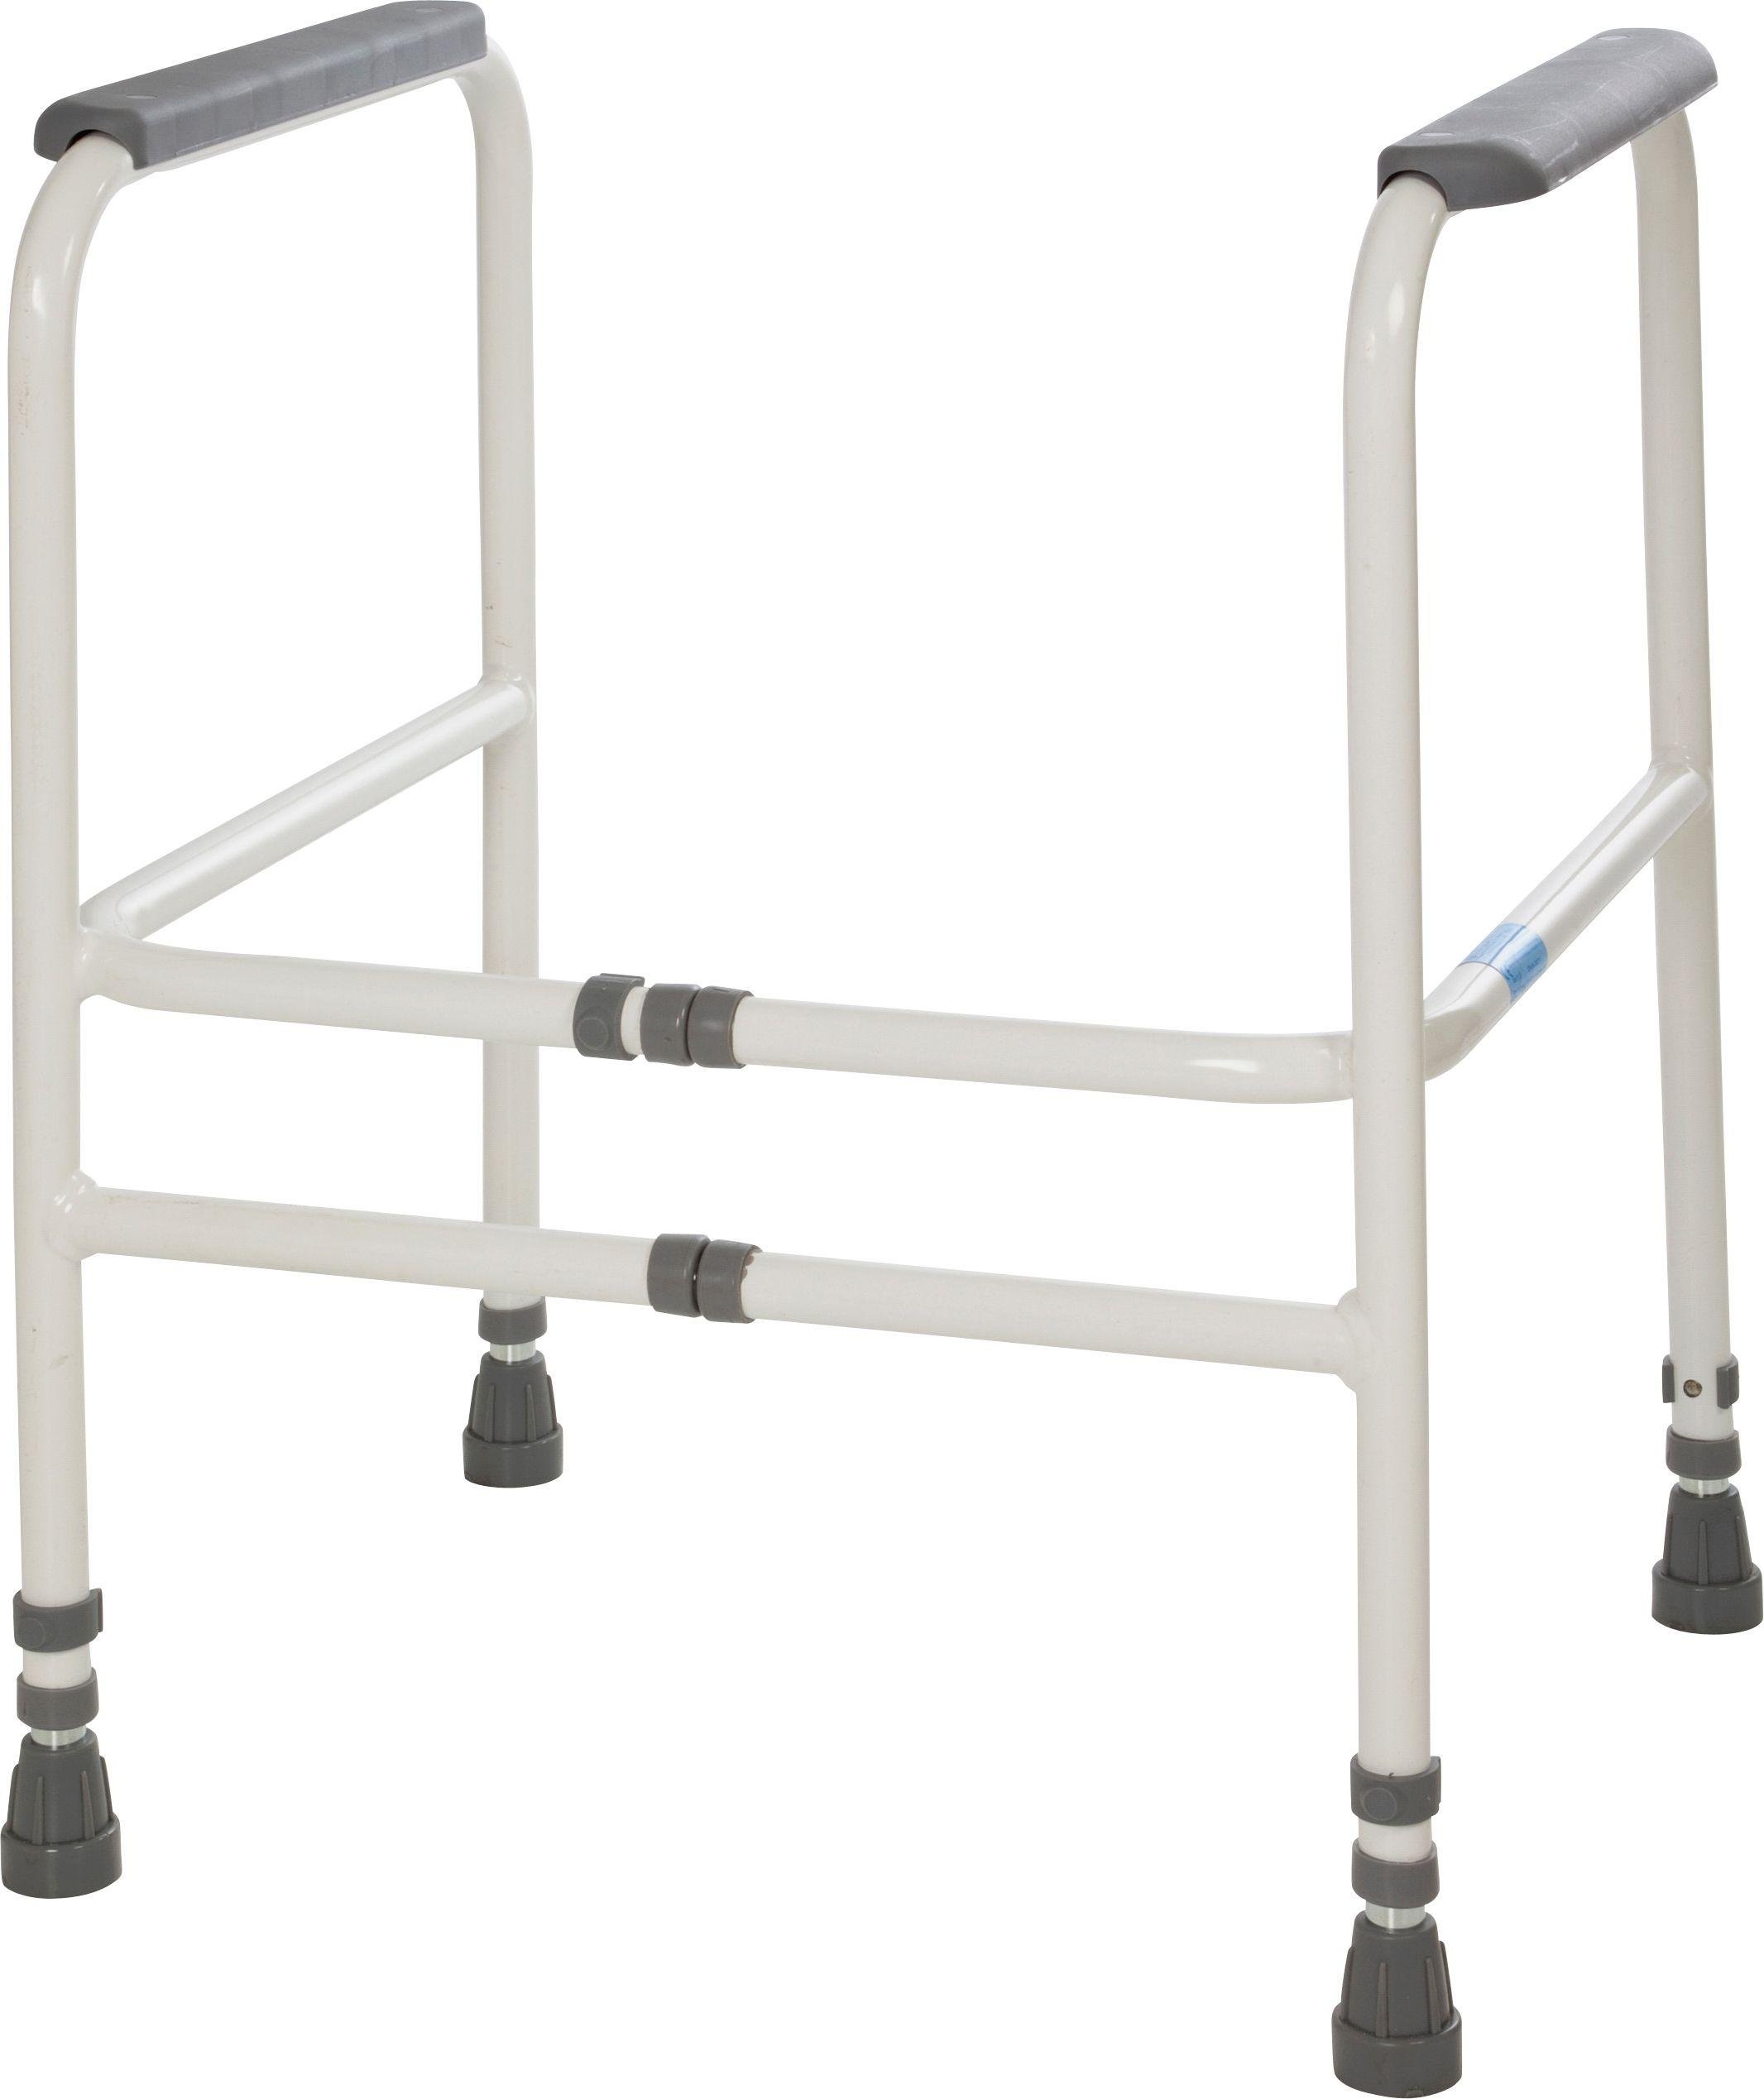 Toilet Frame - Height and Width Adjustable